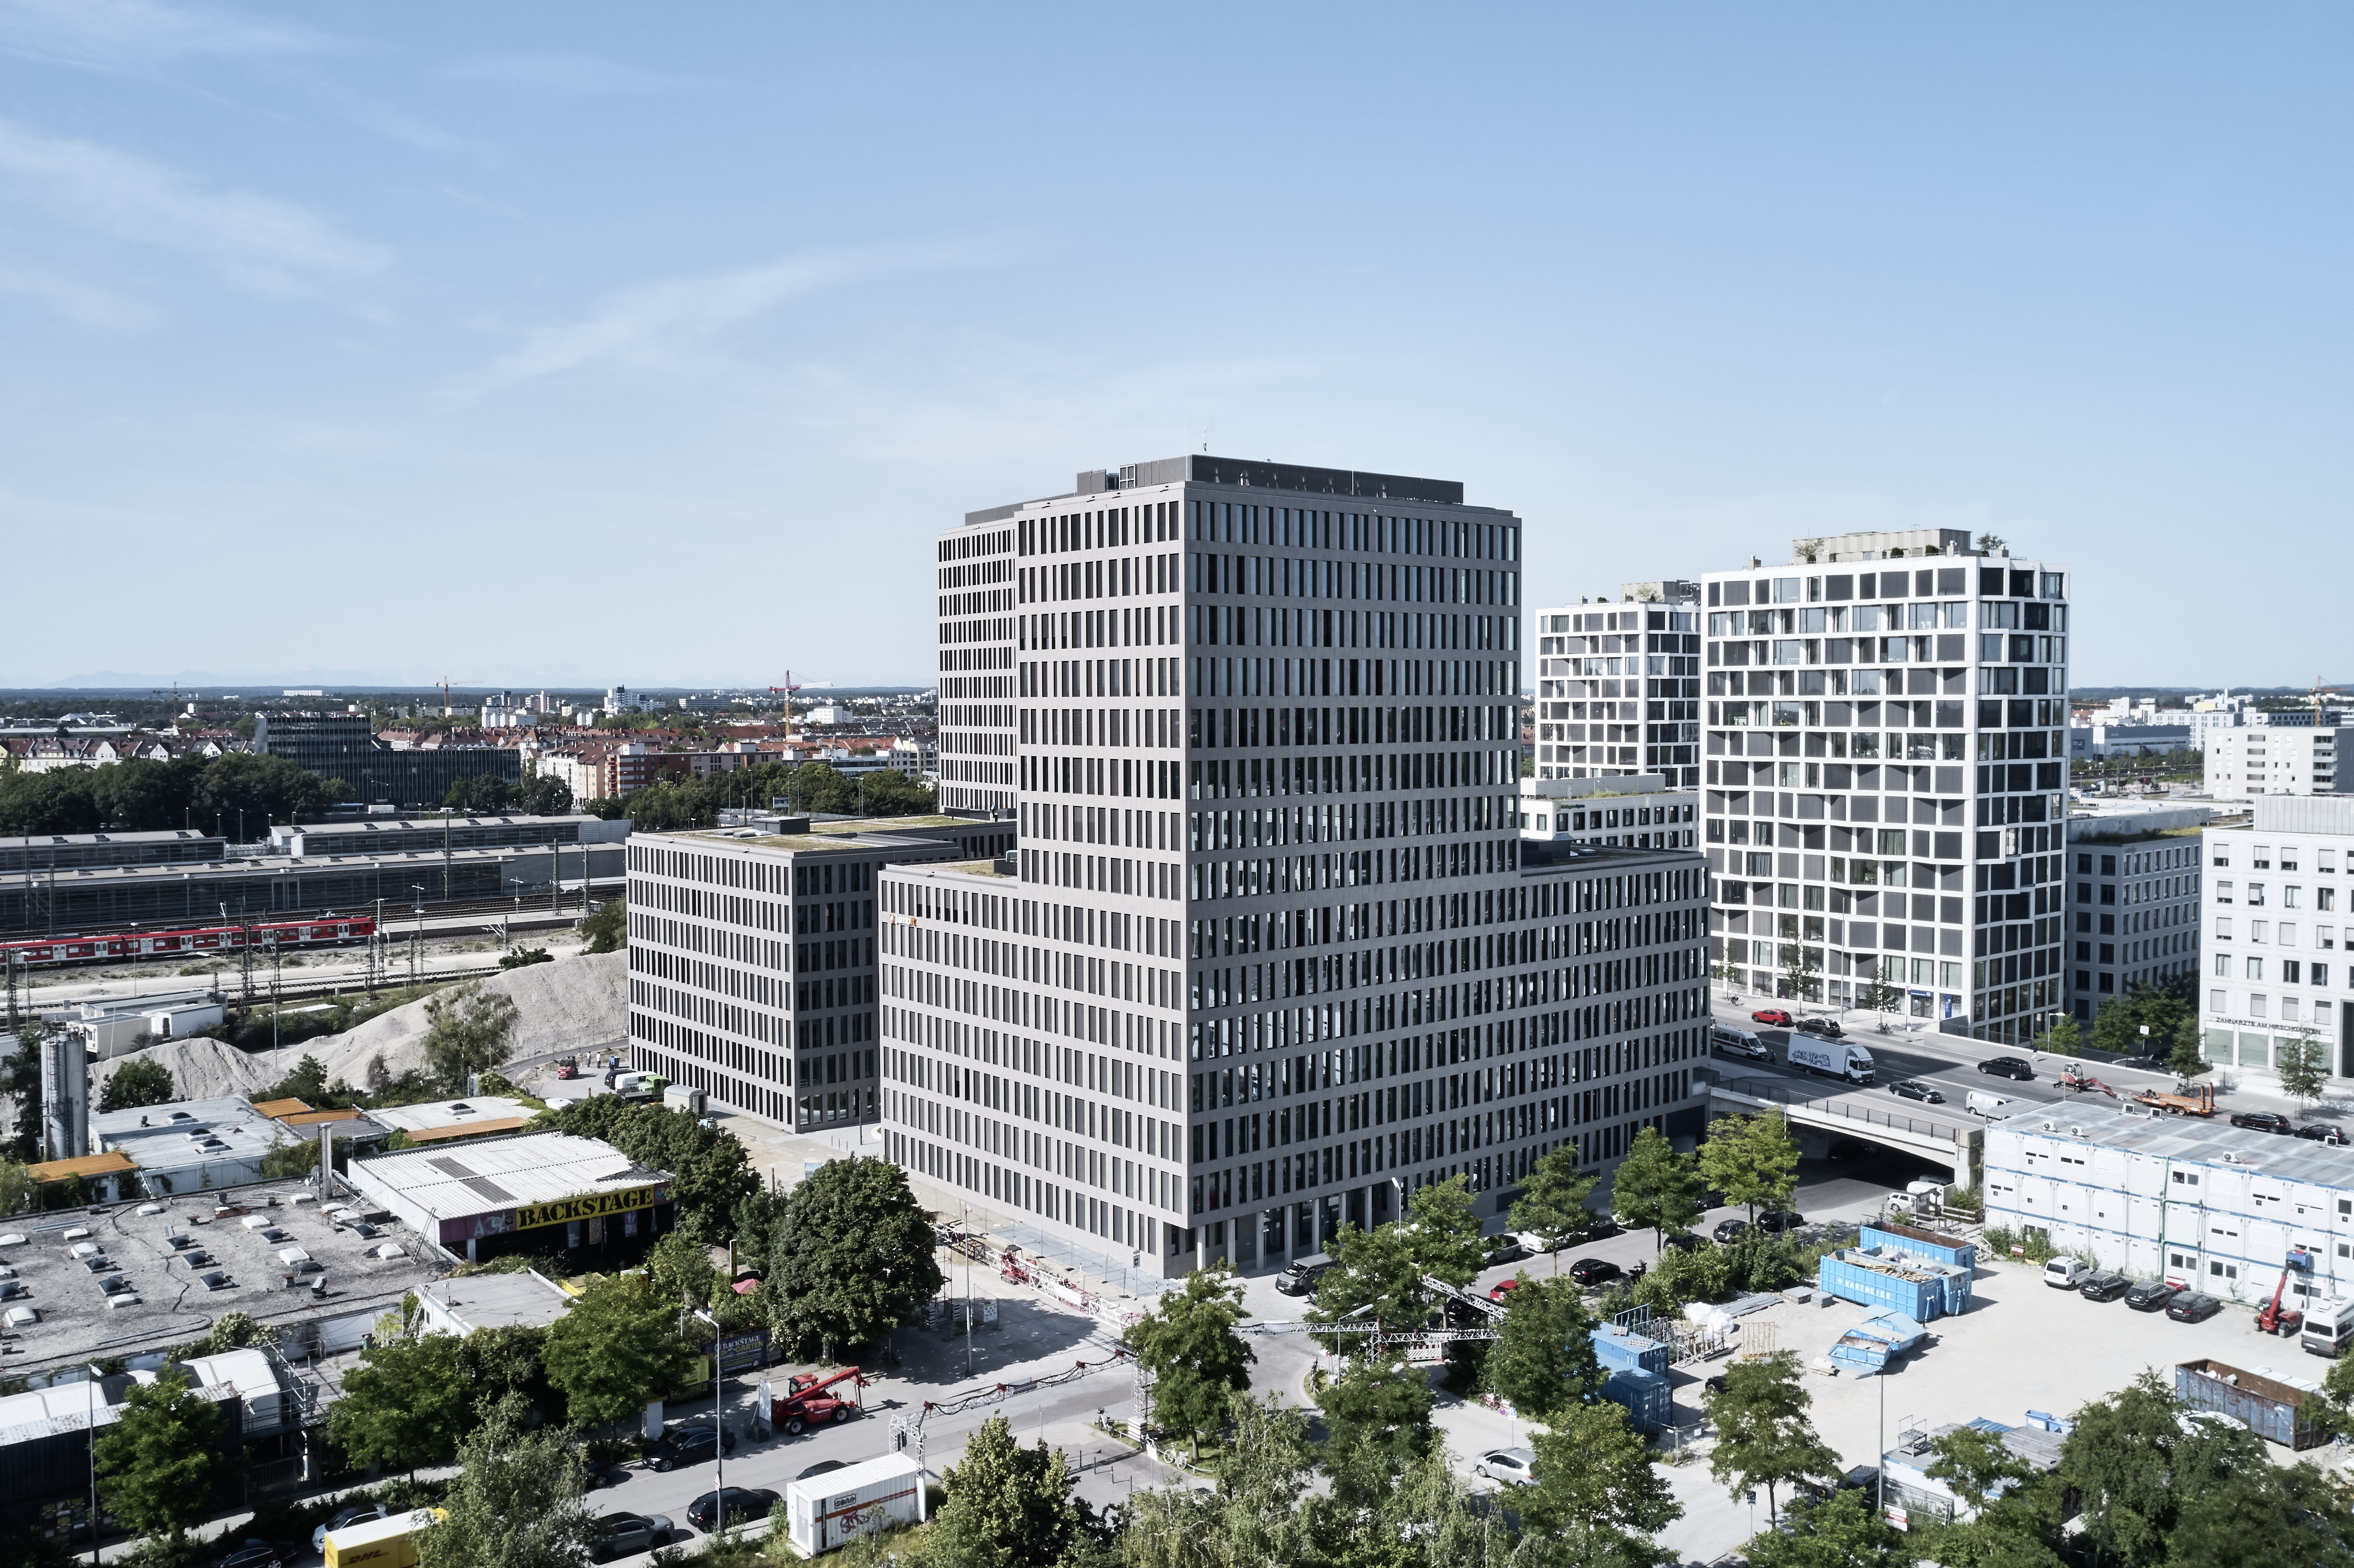 Kap West in Munich chooses WICONA unitised façade solution